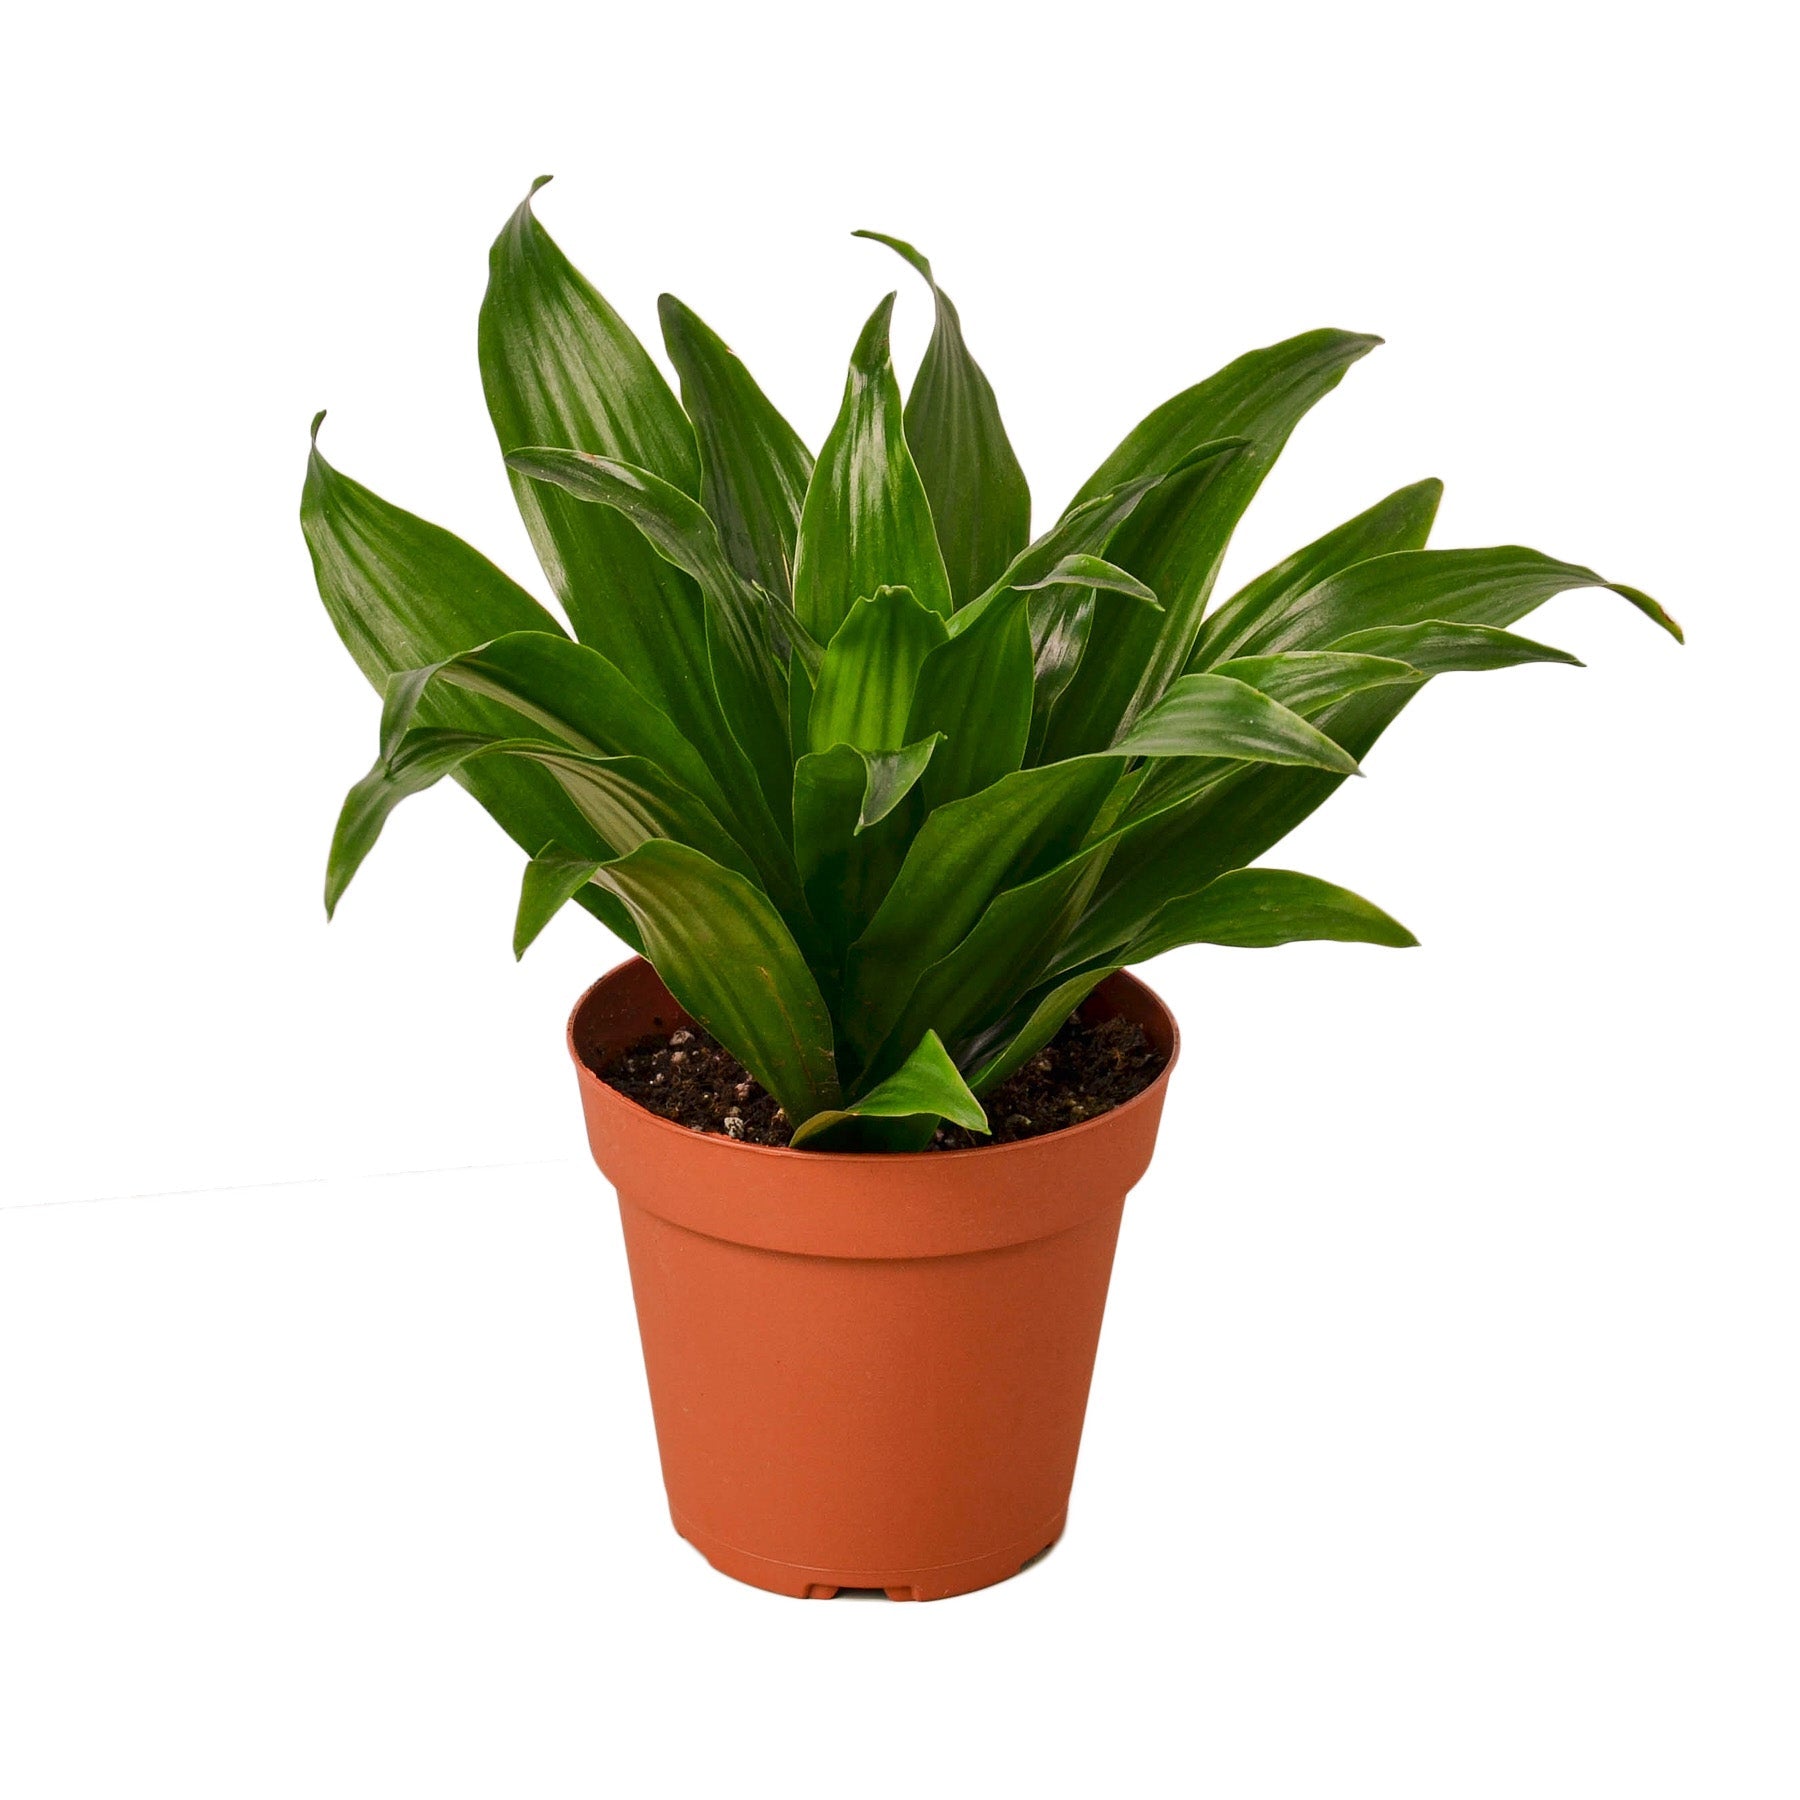 A plant in a pot on a white background from one of the top garden centers near me.